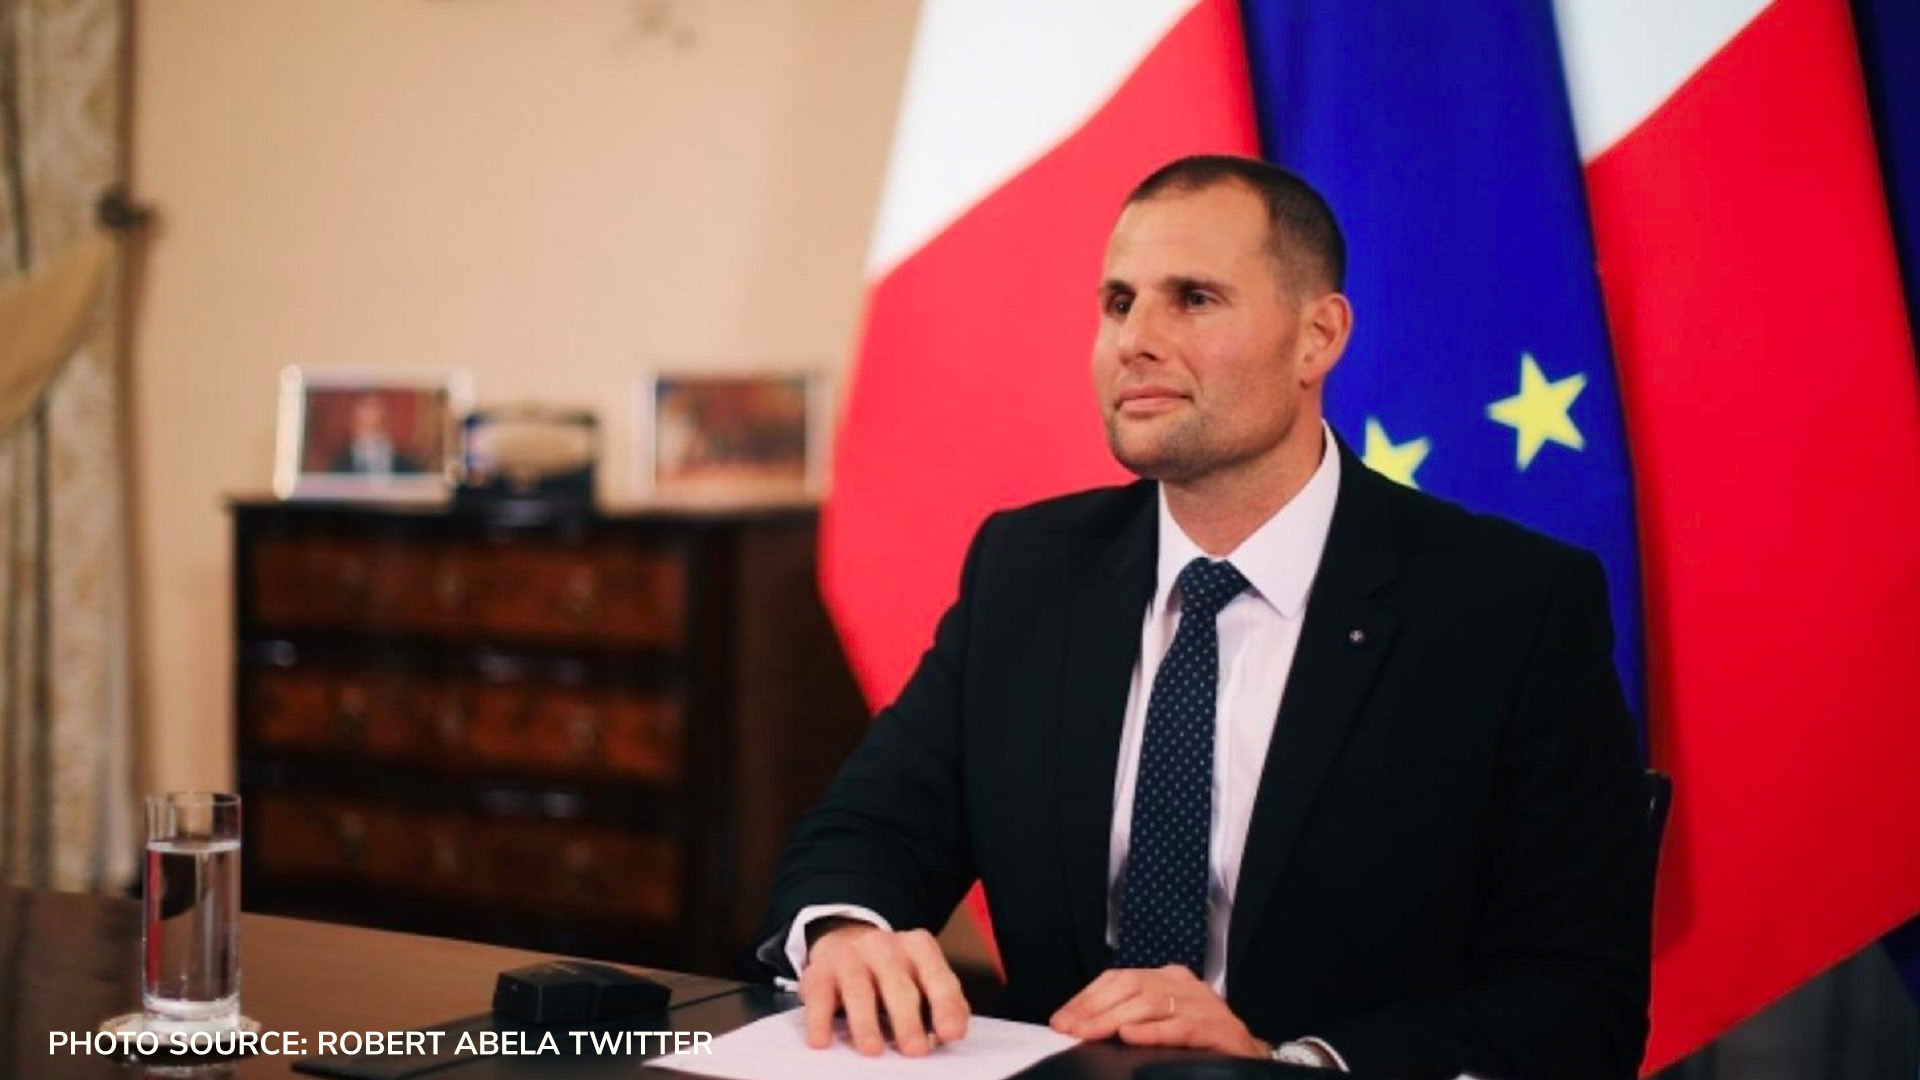 Prime Minister Robert Abela invites European Parliament leaders to Malta to witness institutional reforms